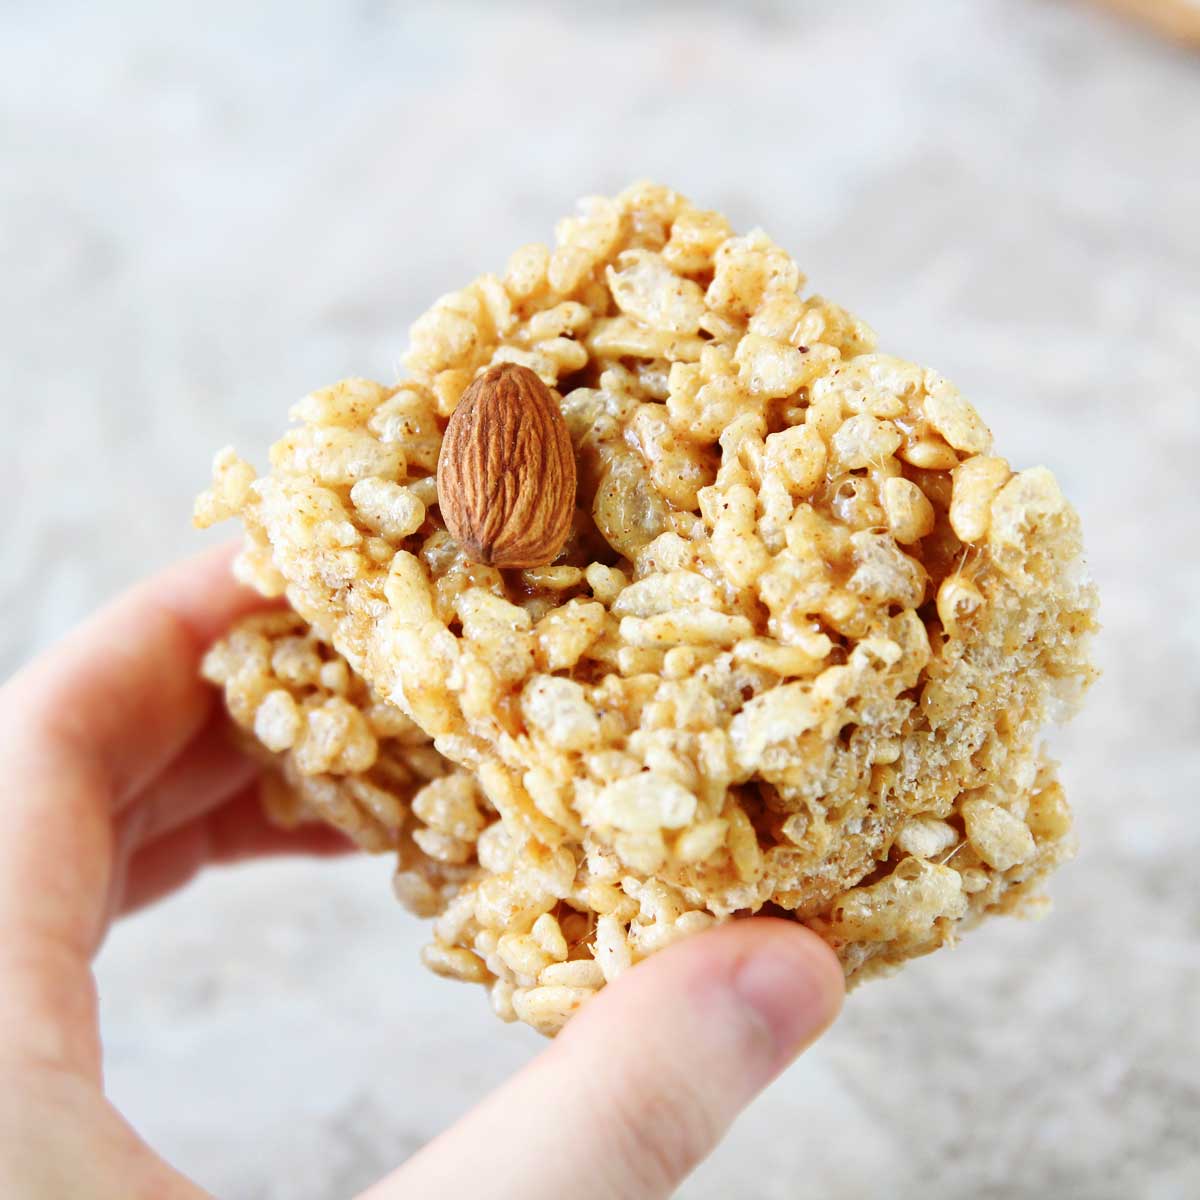 Homemade Almond Butter Rice Krispies Treats Recipe - PB Fit Protein Bars